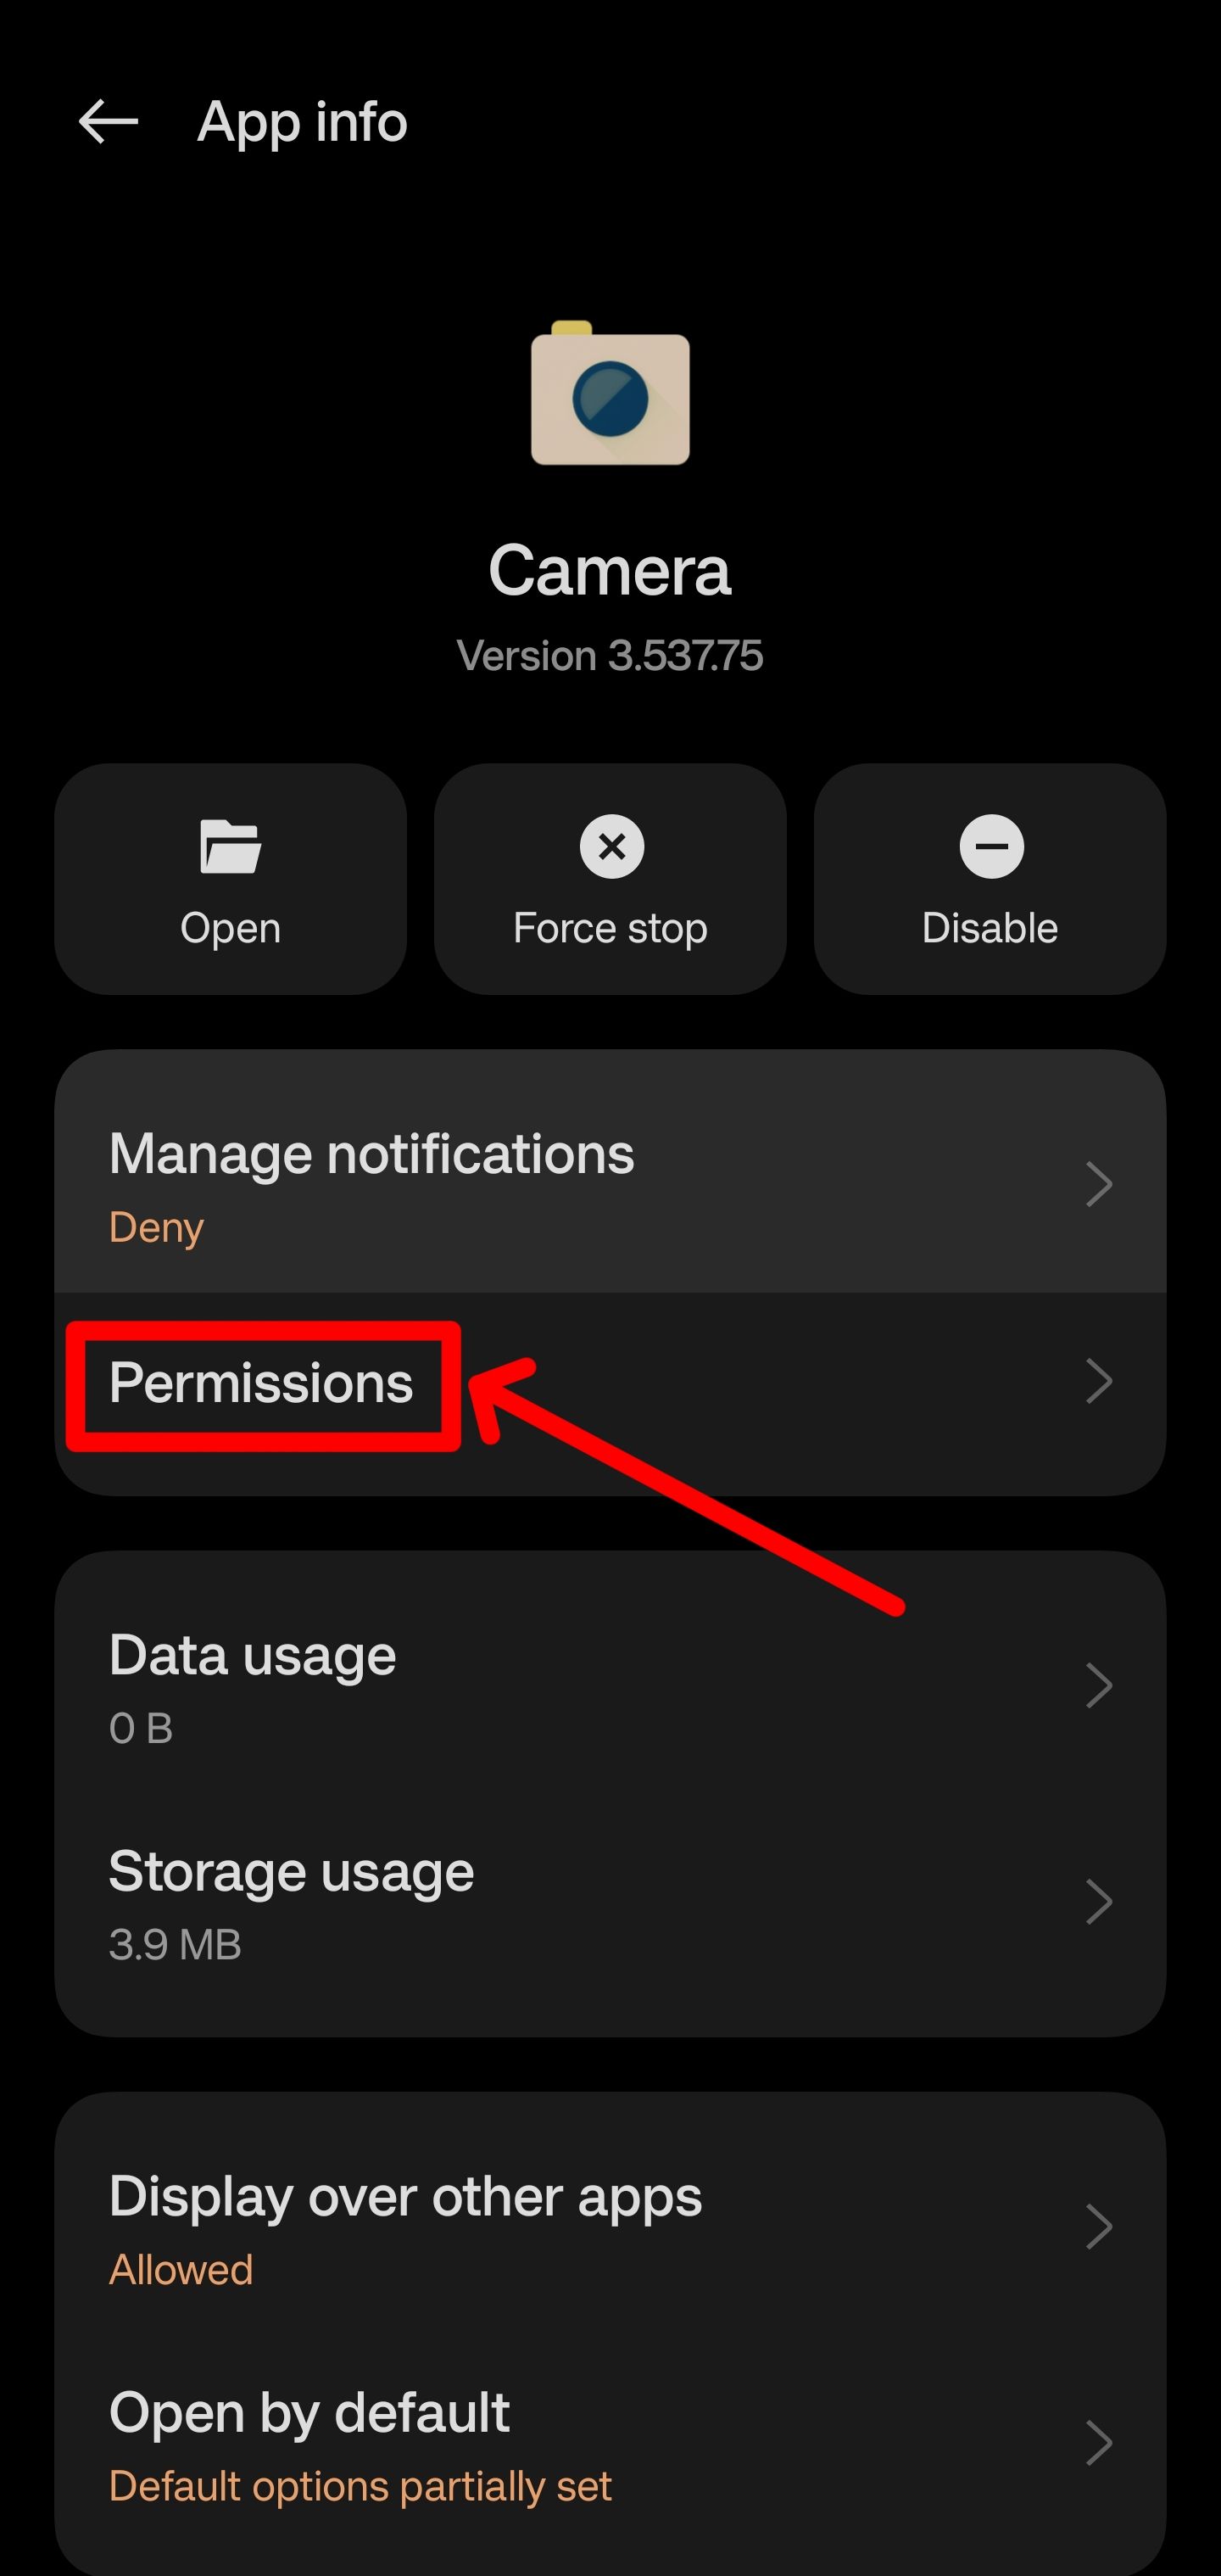 Tap Permissions to access info such as location tracking permissions.